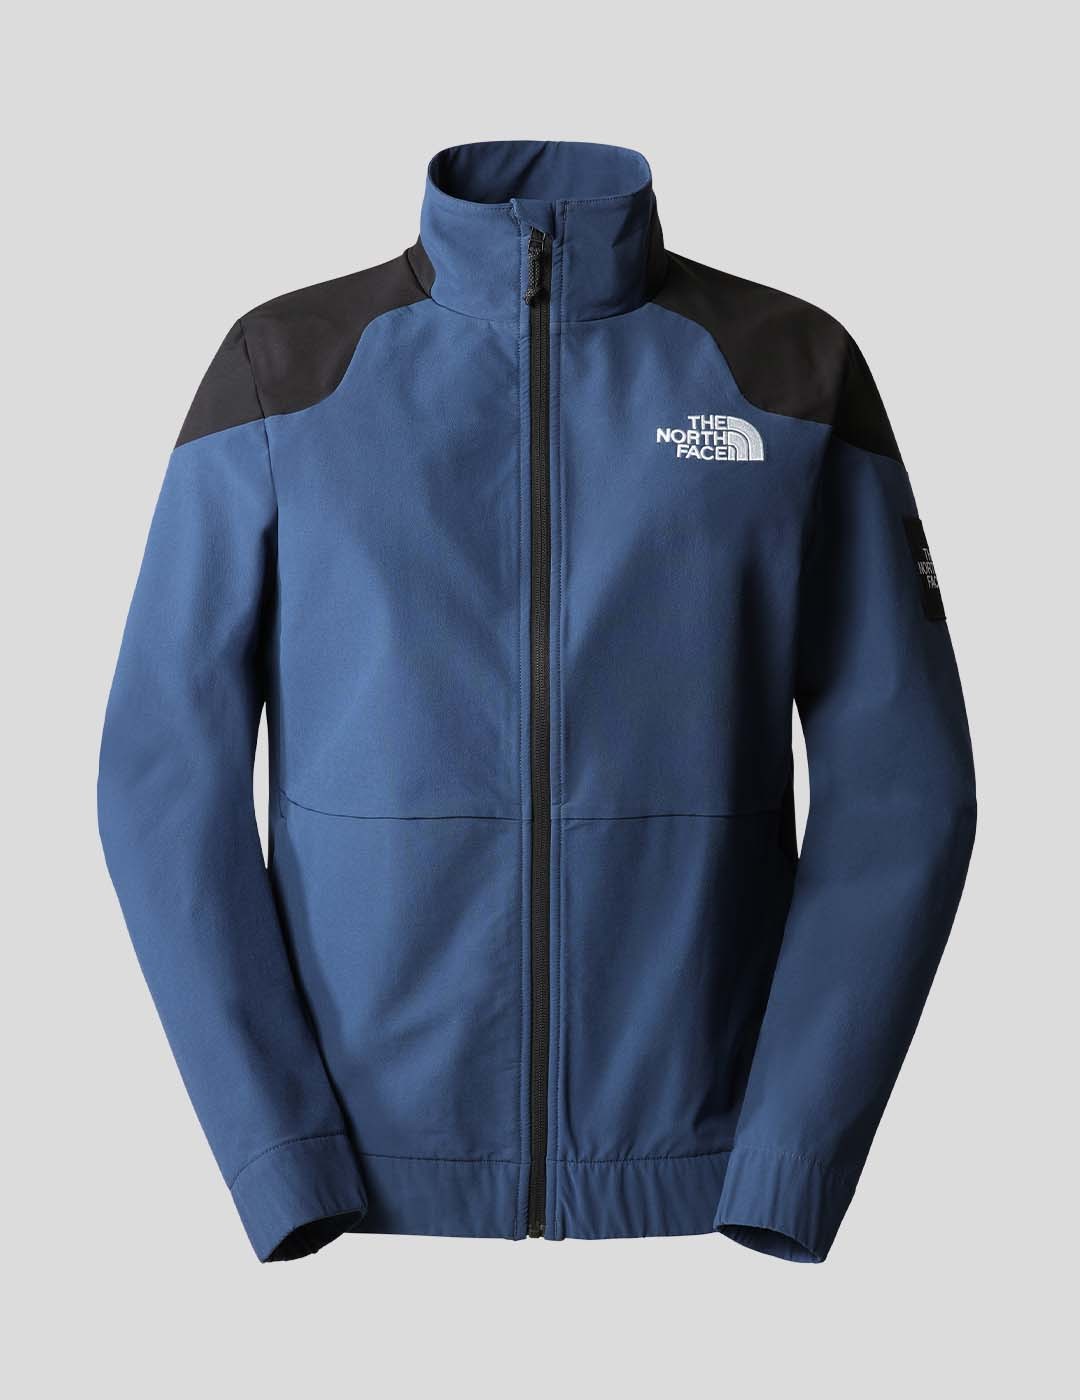 CHAQUETA THE NORTH FACE CARDUELIS WIND JACKET  SHADY BLUE